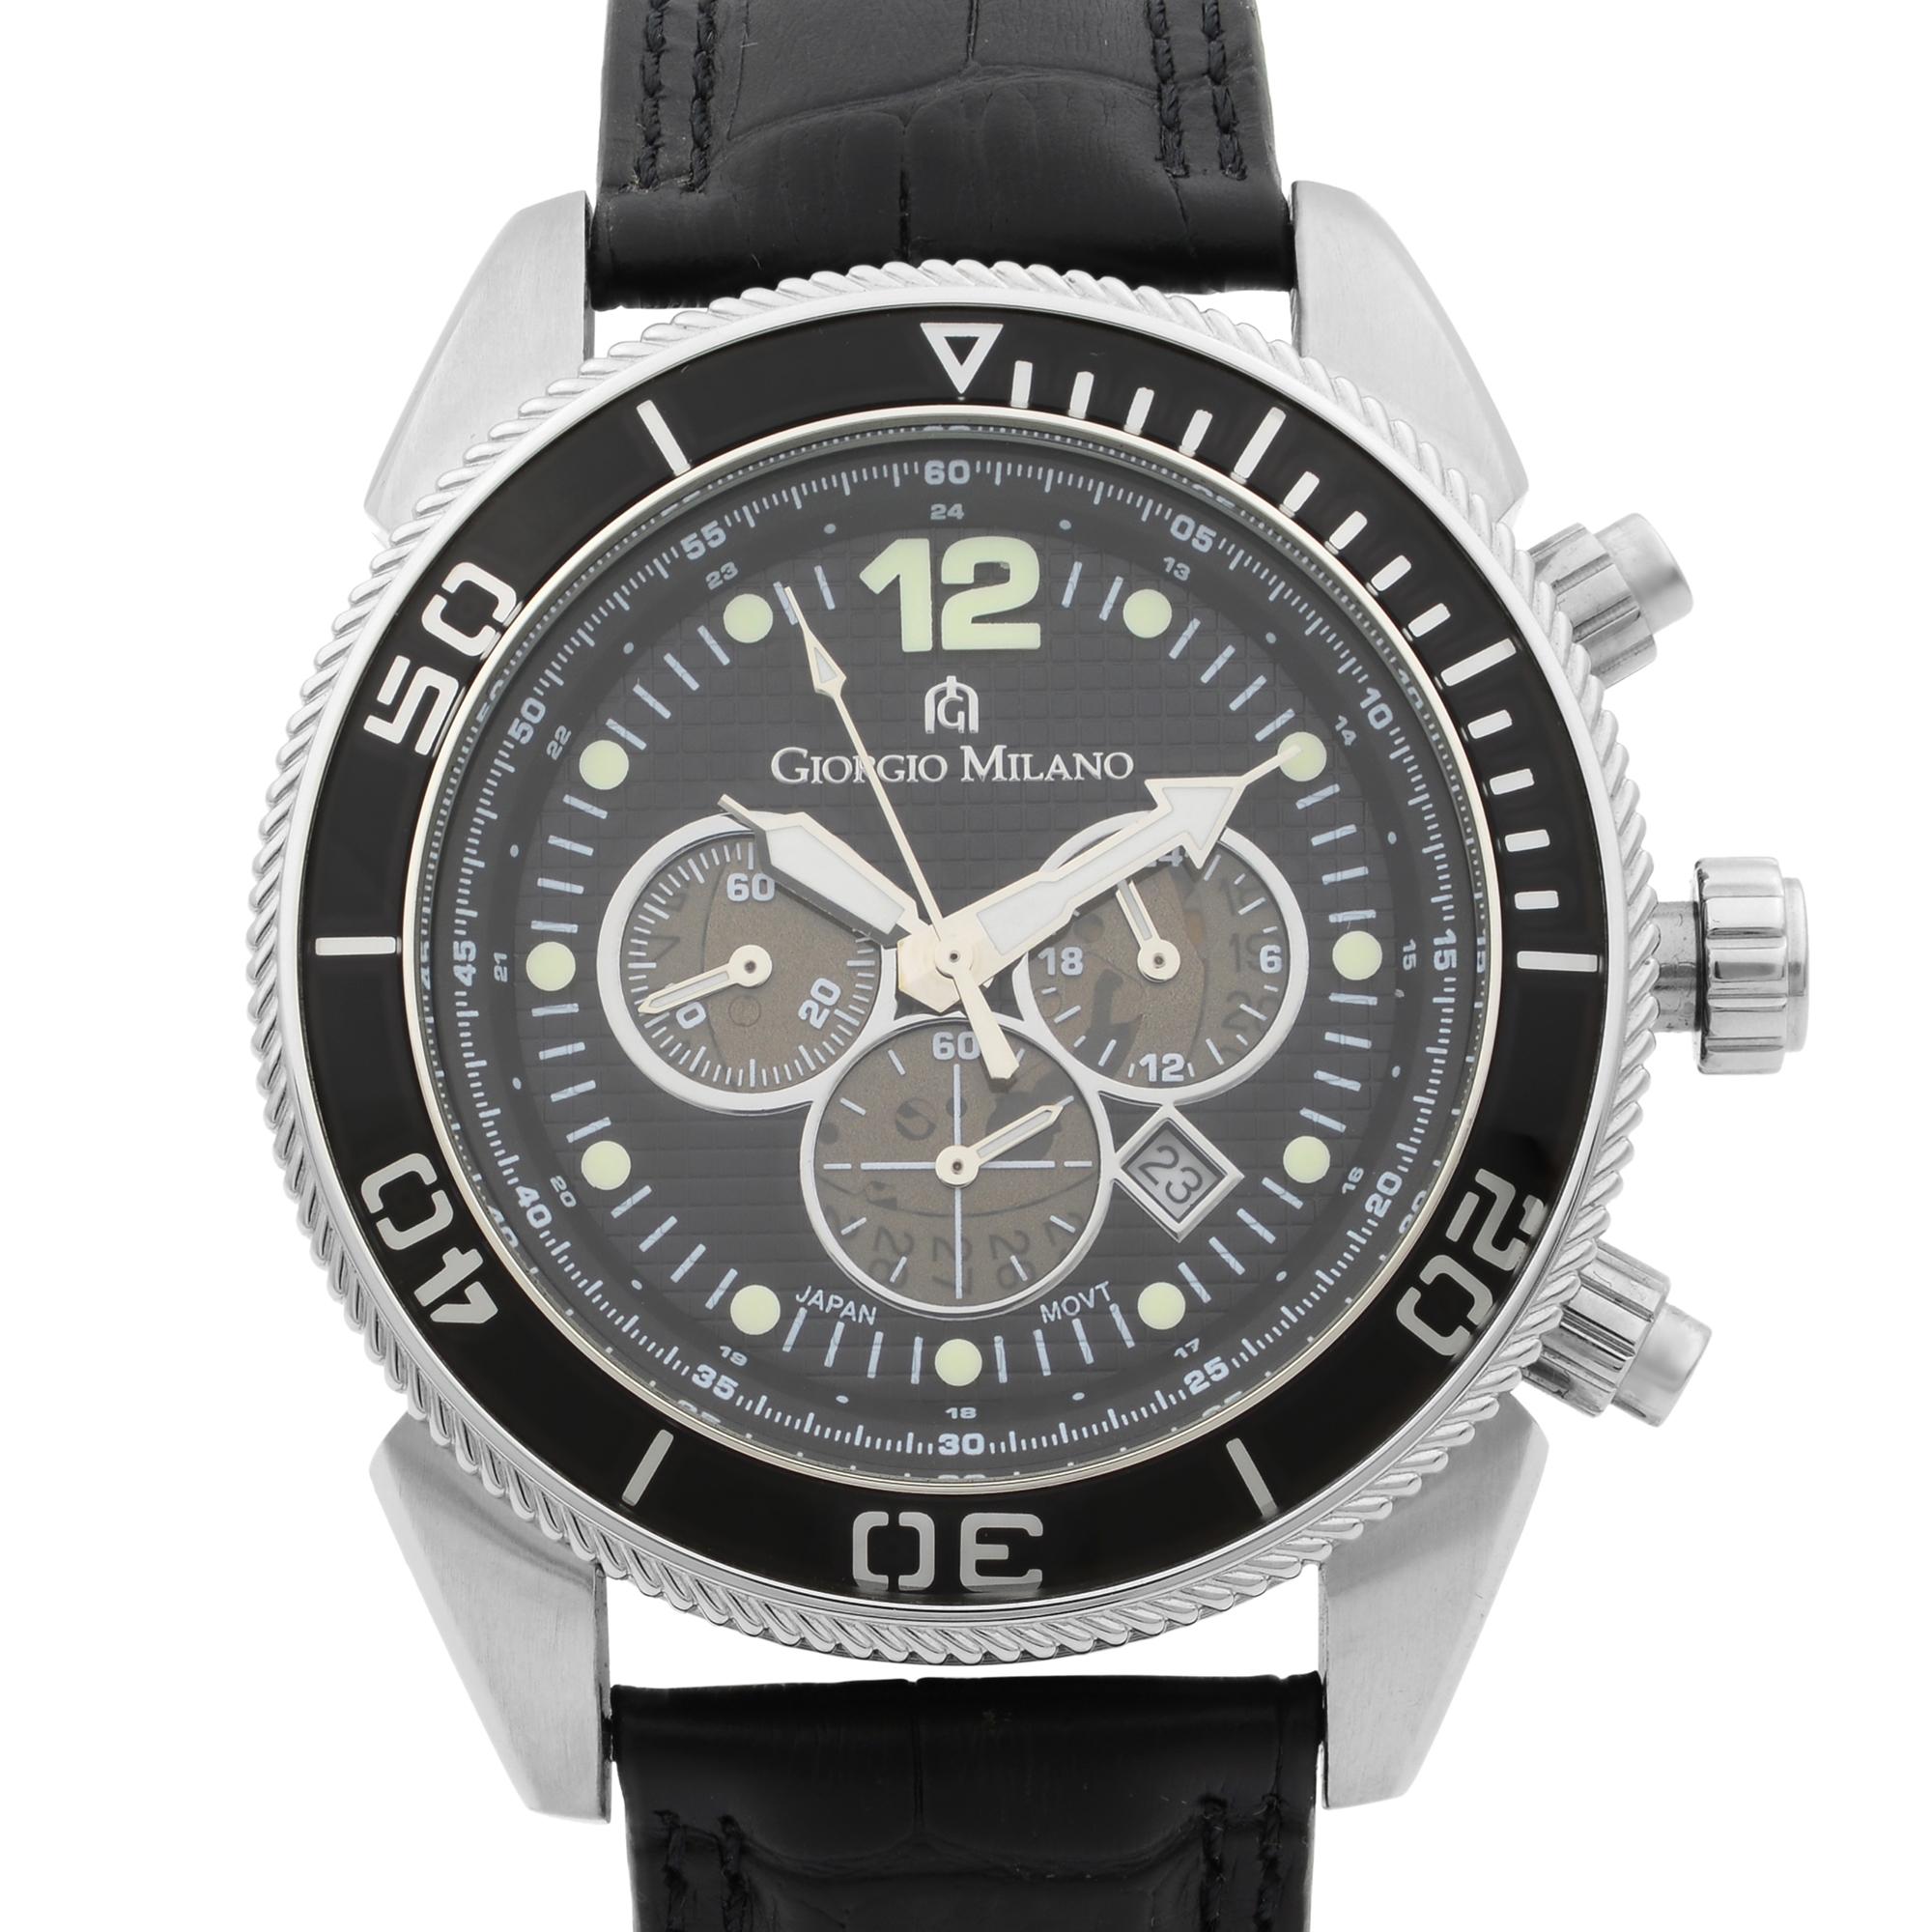 Giorgio Milano Stainless Steel Chronograph Quartz Mens Watch 871ST032.
The timepiece comes with original box and papers.